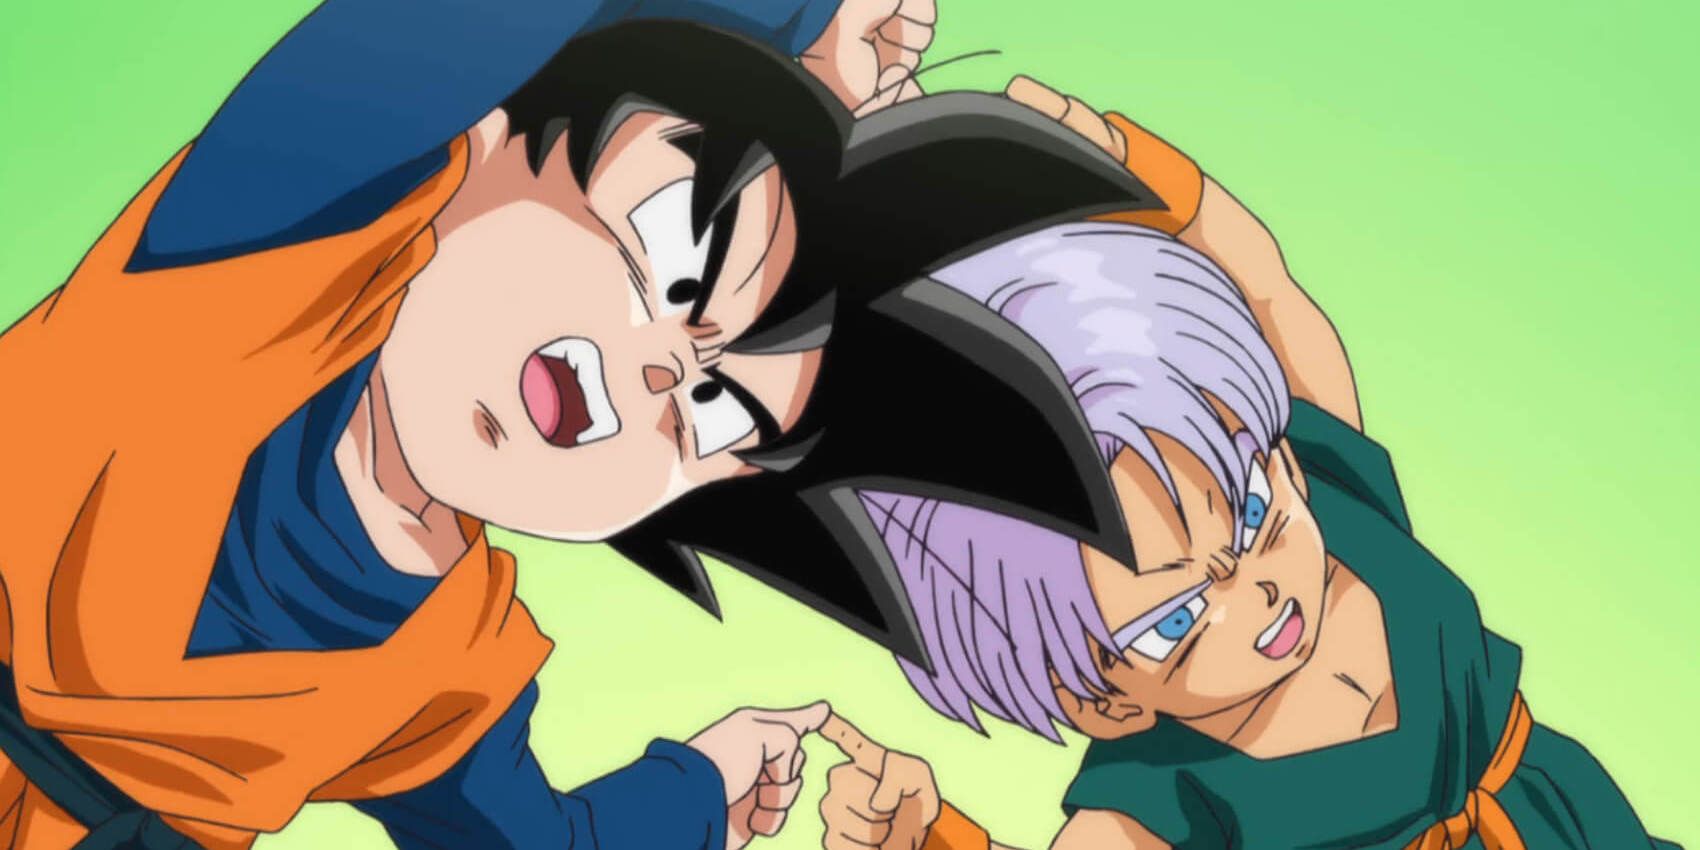 Dragon Ball Super: Every Main Character’s Age, Height, And Birthday